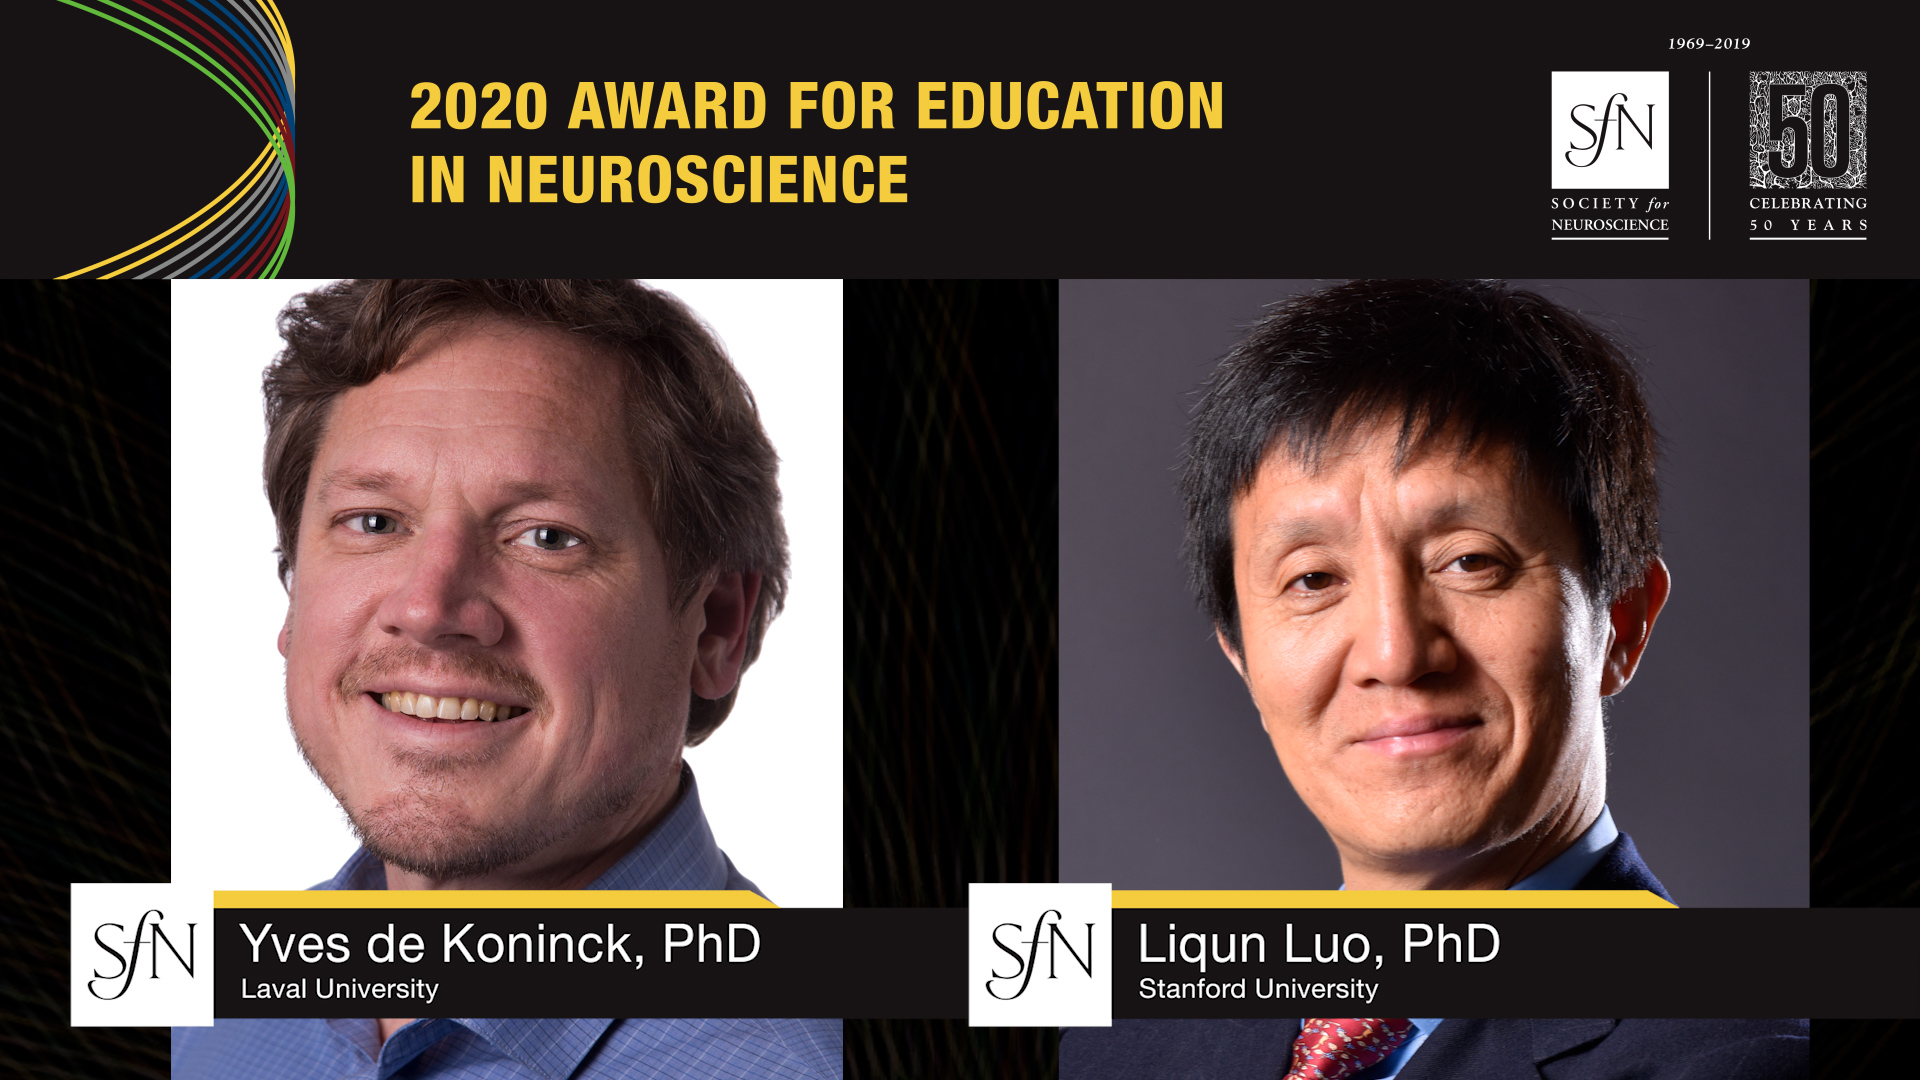 2020 Award for Education in Neuroscience award winners graphic, image of Yves de Koninck, PhD Laval University and Liqun Luo, PhD Stanford University